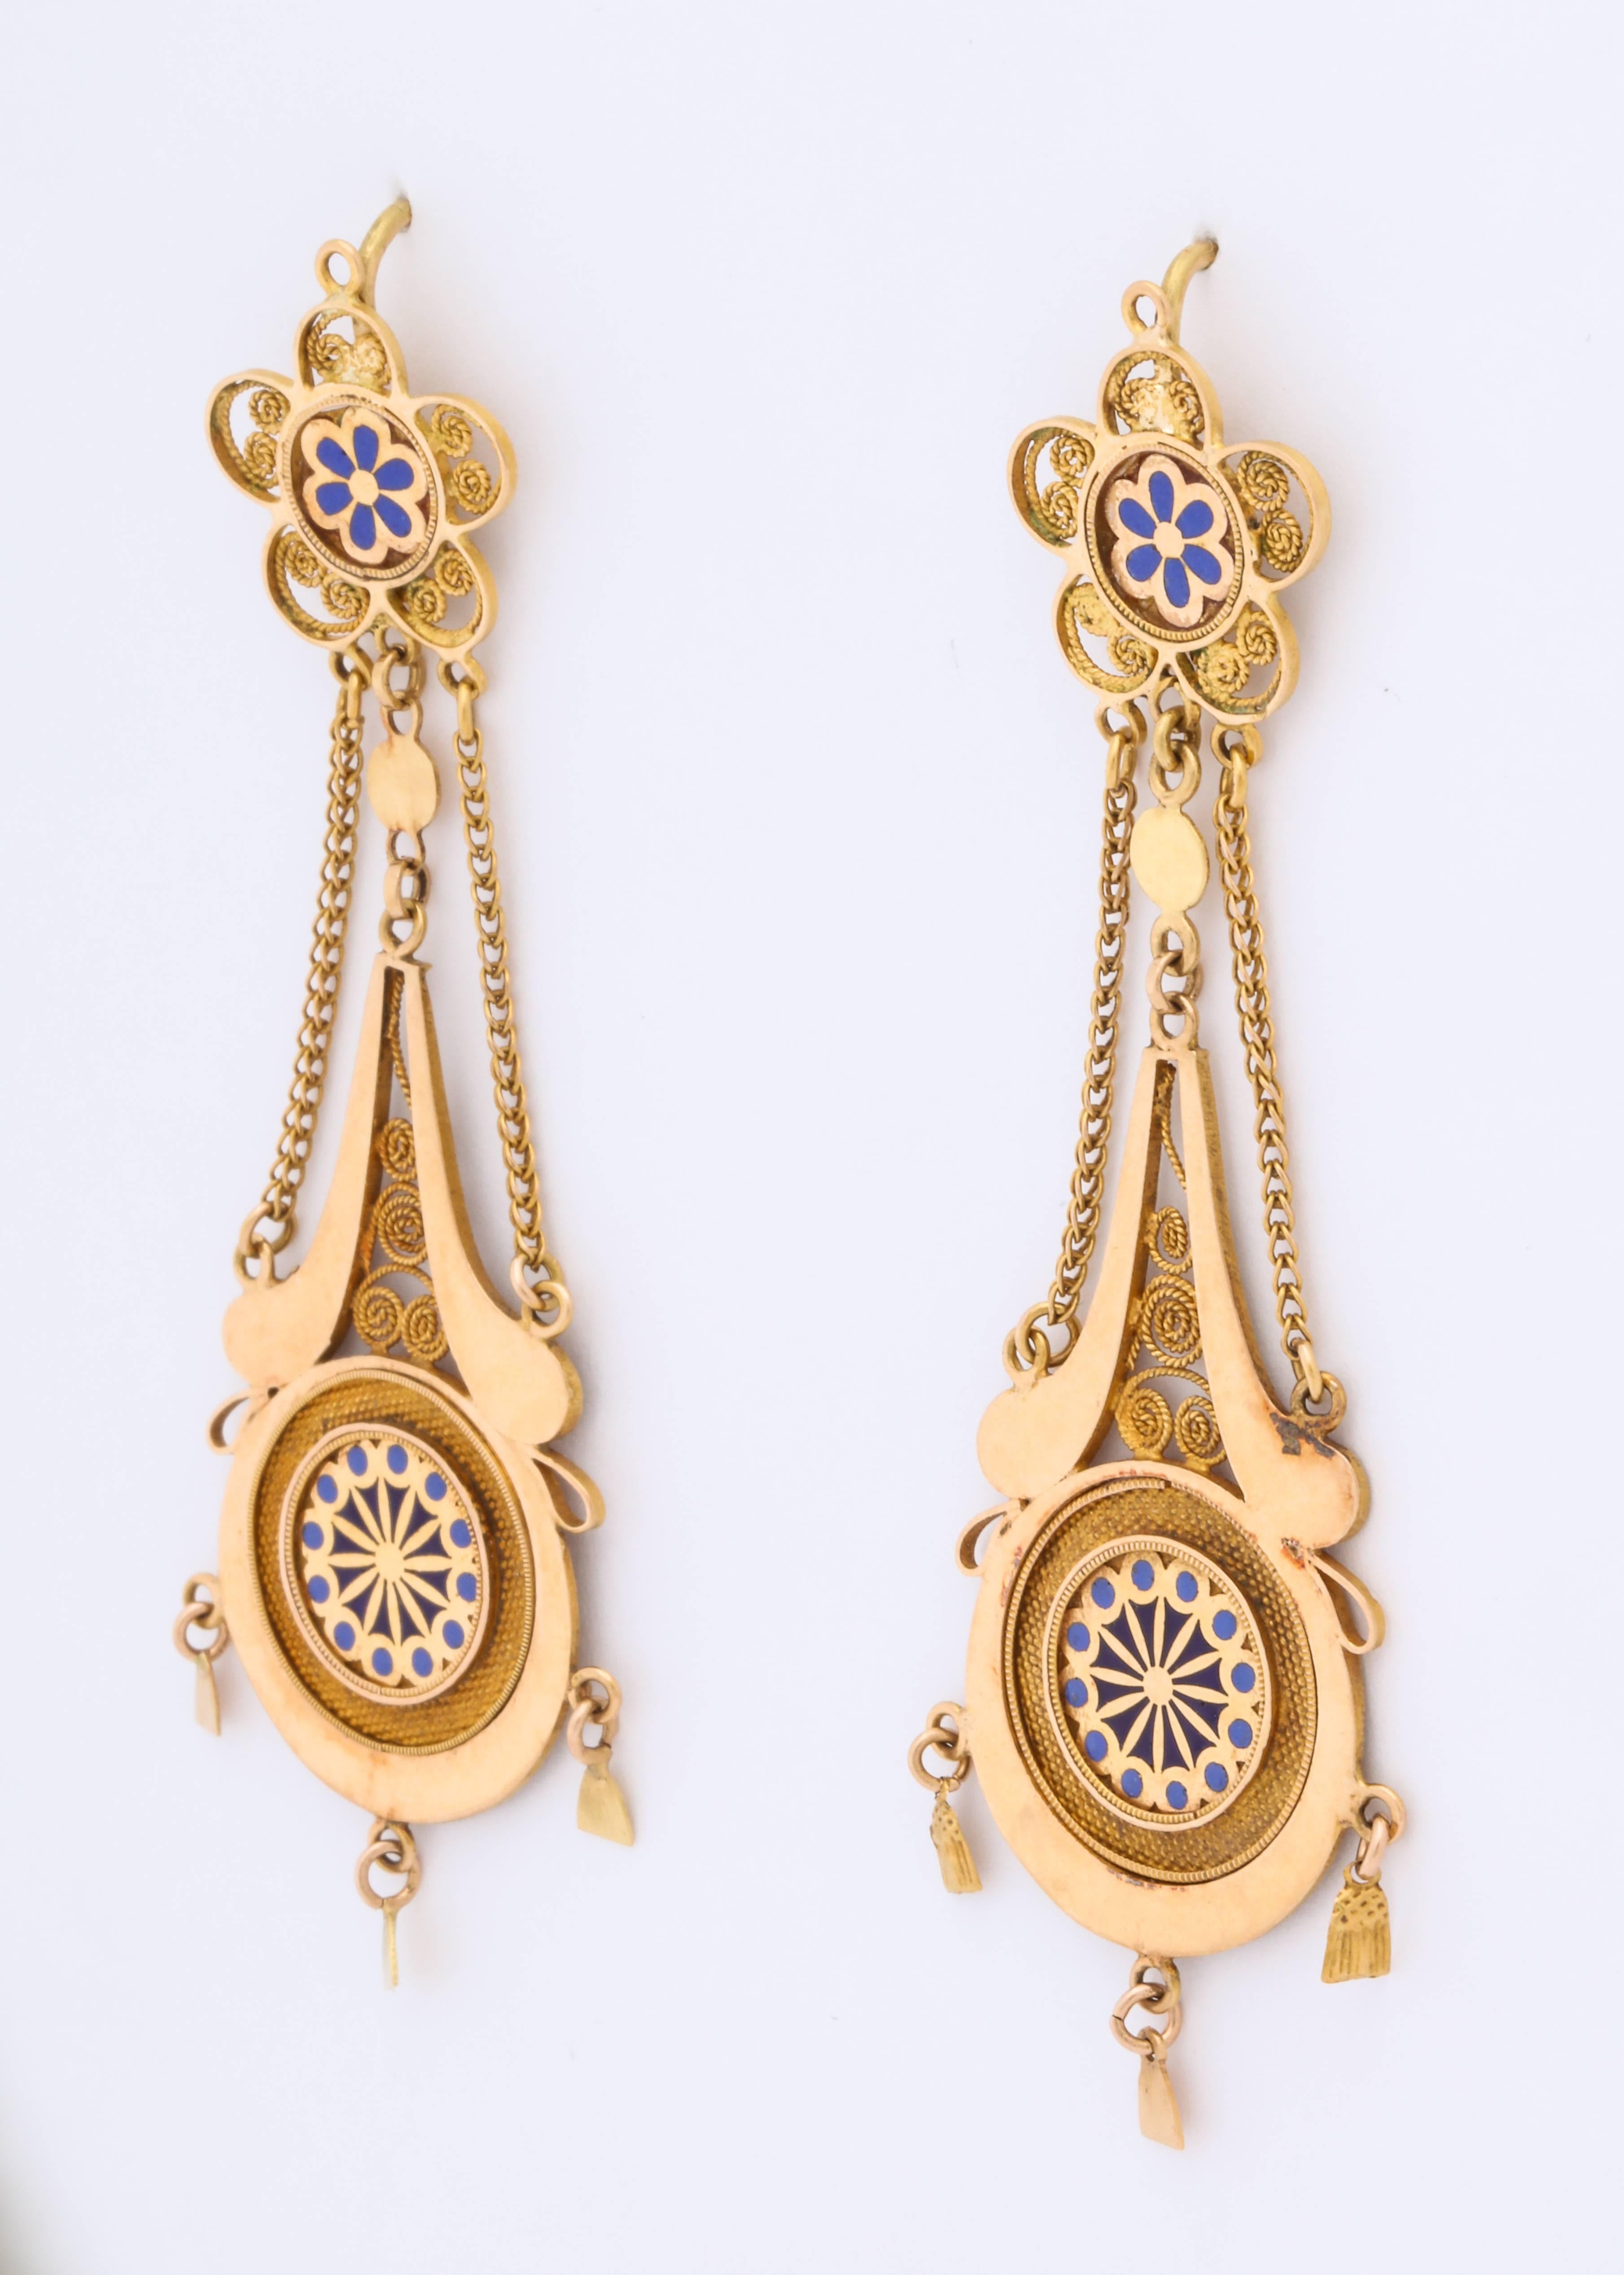 Magnificent French 18 kt chandelier earrings c. 1800 are featherweight, and of amazing workmanship with their enamel daisy, geometric lower design, cannetille coils and three small bells at bottom. Chains suspend the sections of these earrings as